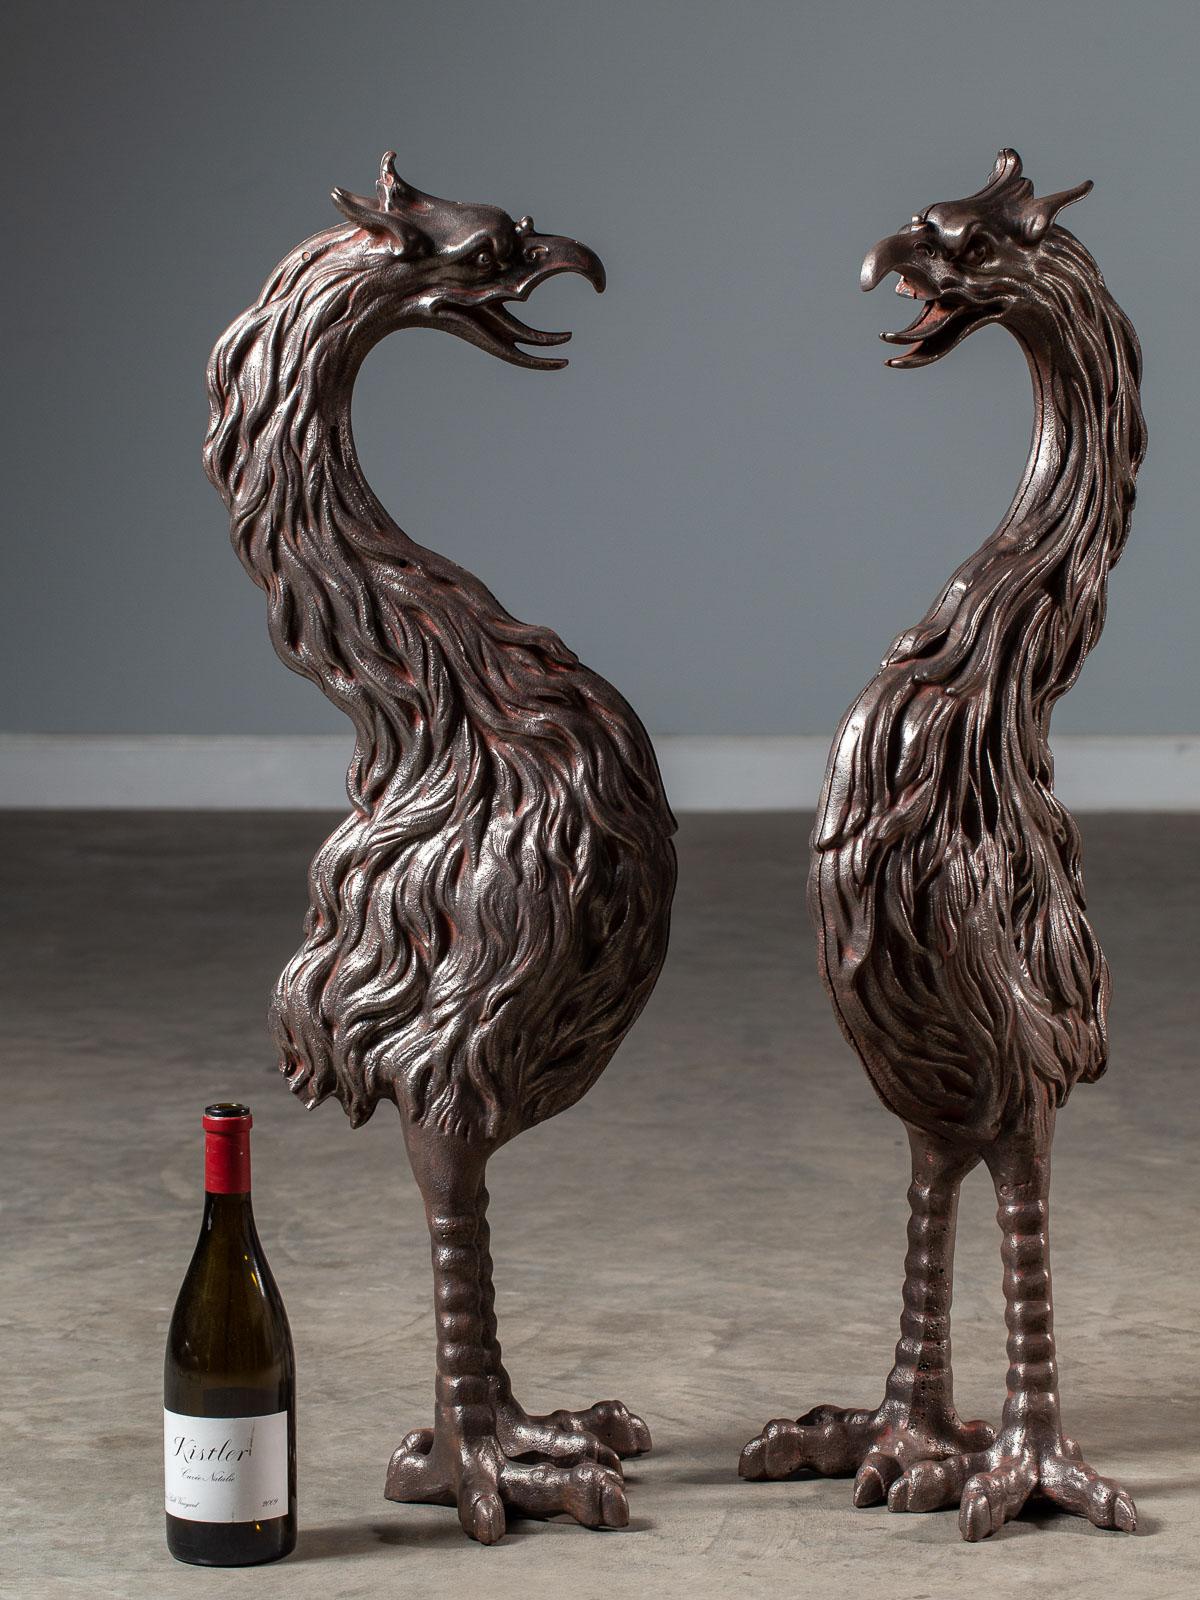 This pair of tall cast iron Phoenix birds are antique French circa 1880 and originally graced the entry to a lavish garden. The legend of the Phoenix bird appears in Greek mythology as associated with Sun and who rises from the ashes to live again.